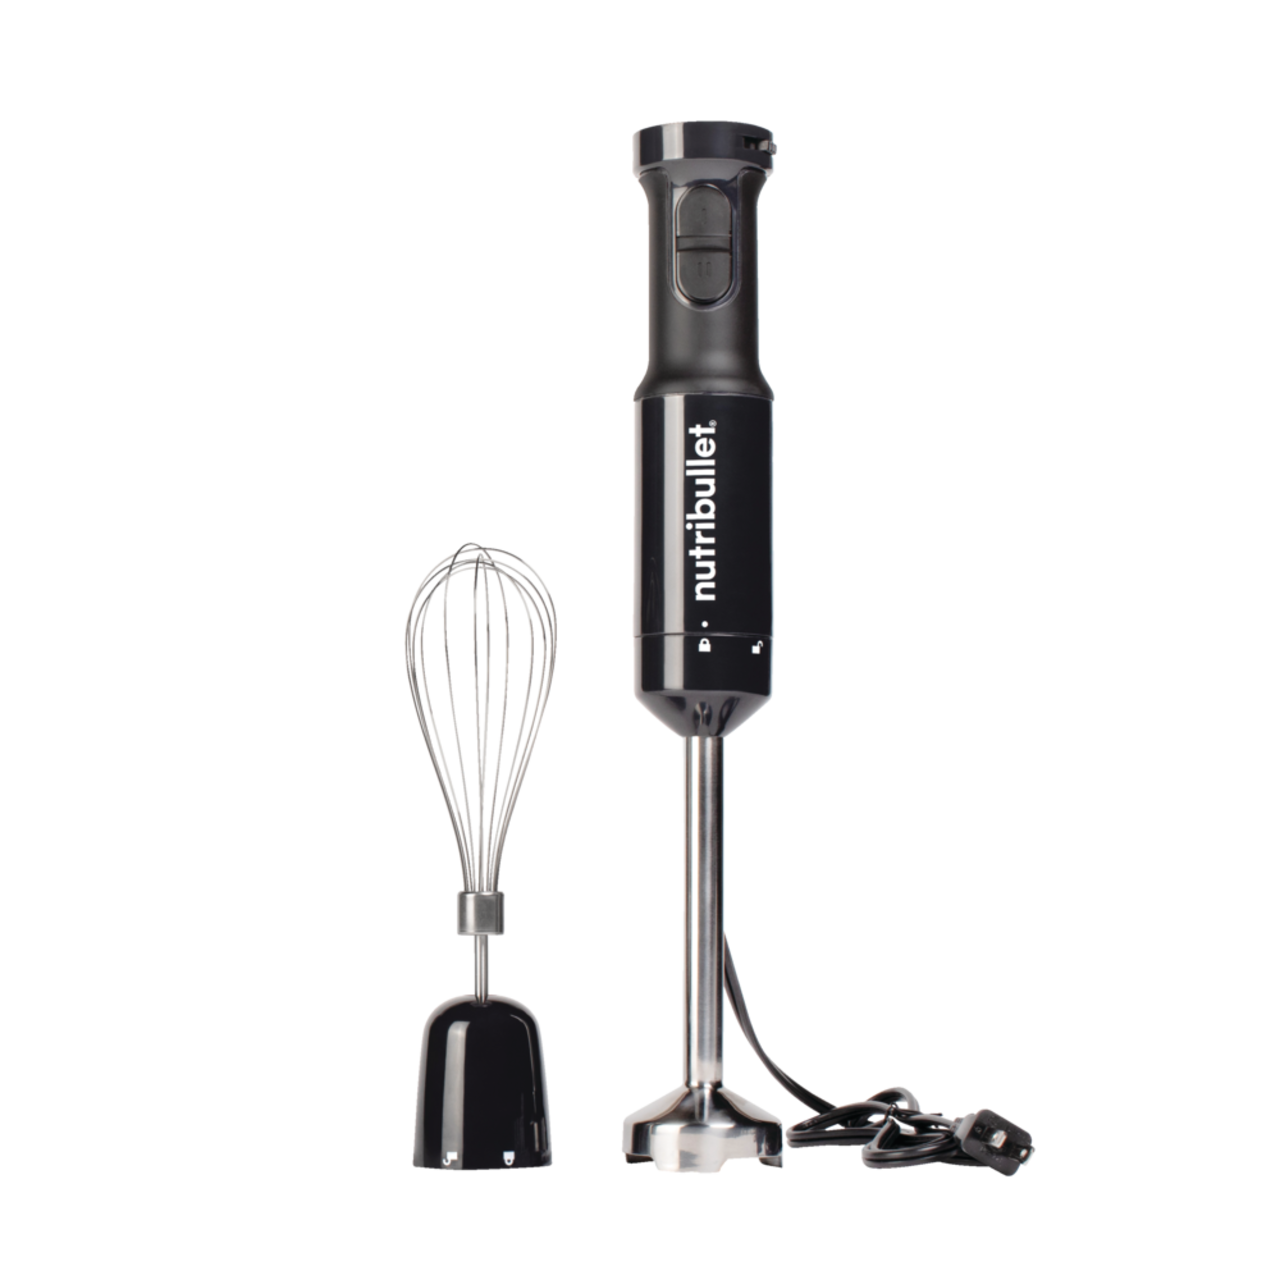 https://media-www.canadiantire.ca/product/living/kitchen/kitchen-appliances/0430108/nutribullet-immersion-blender-41007958-39f2-4596-8d5a-630ec1536a65.png?imdensity=1&imwidth=640&impolicy=mZoom